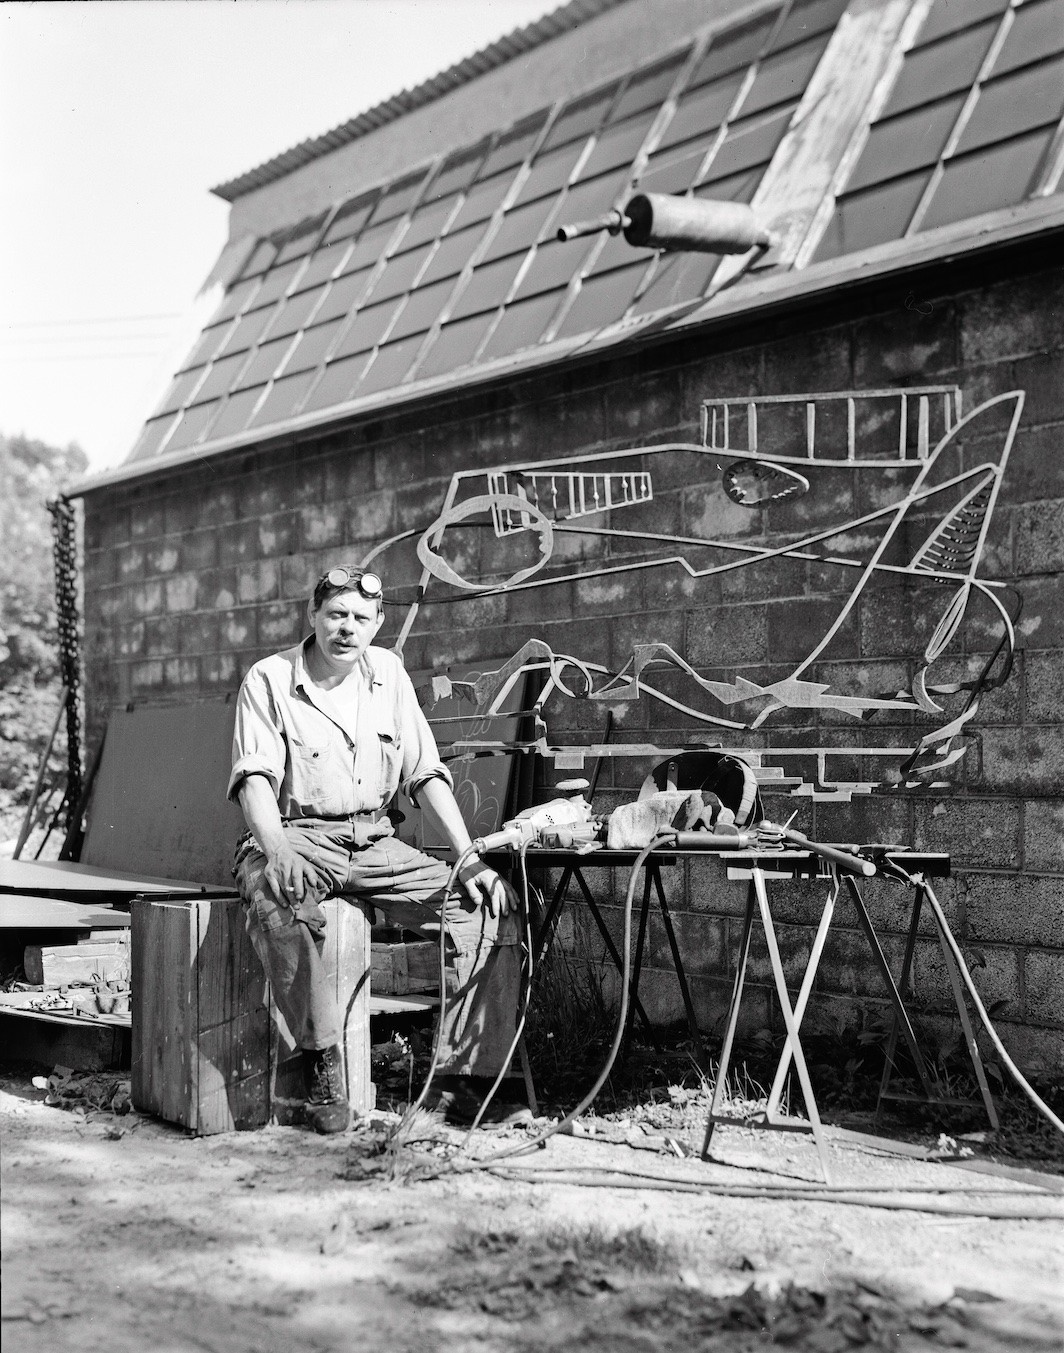 David Smith with his 1951 Hudson River Landscape outside his workshop at Bolton Landing, New York, ca. 1951. © The Estate of David Smith/Licensed by VAGA at Artists Rights Society (ARS), NY